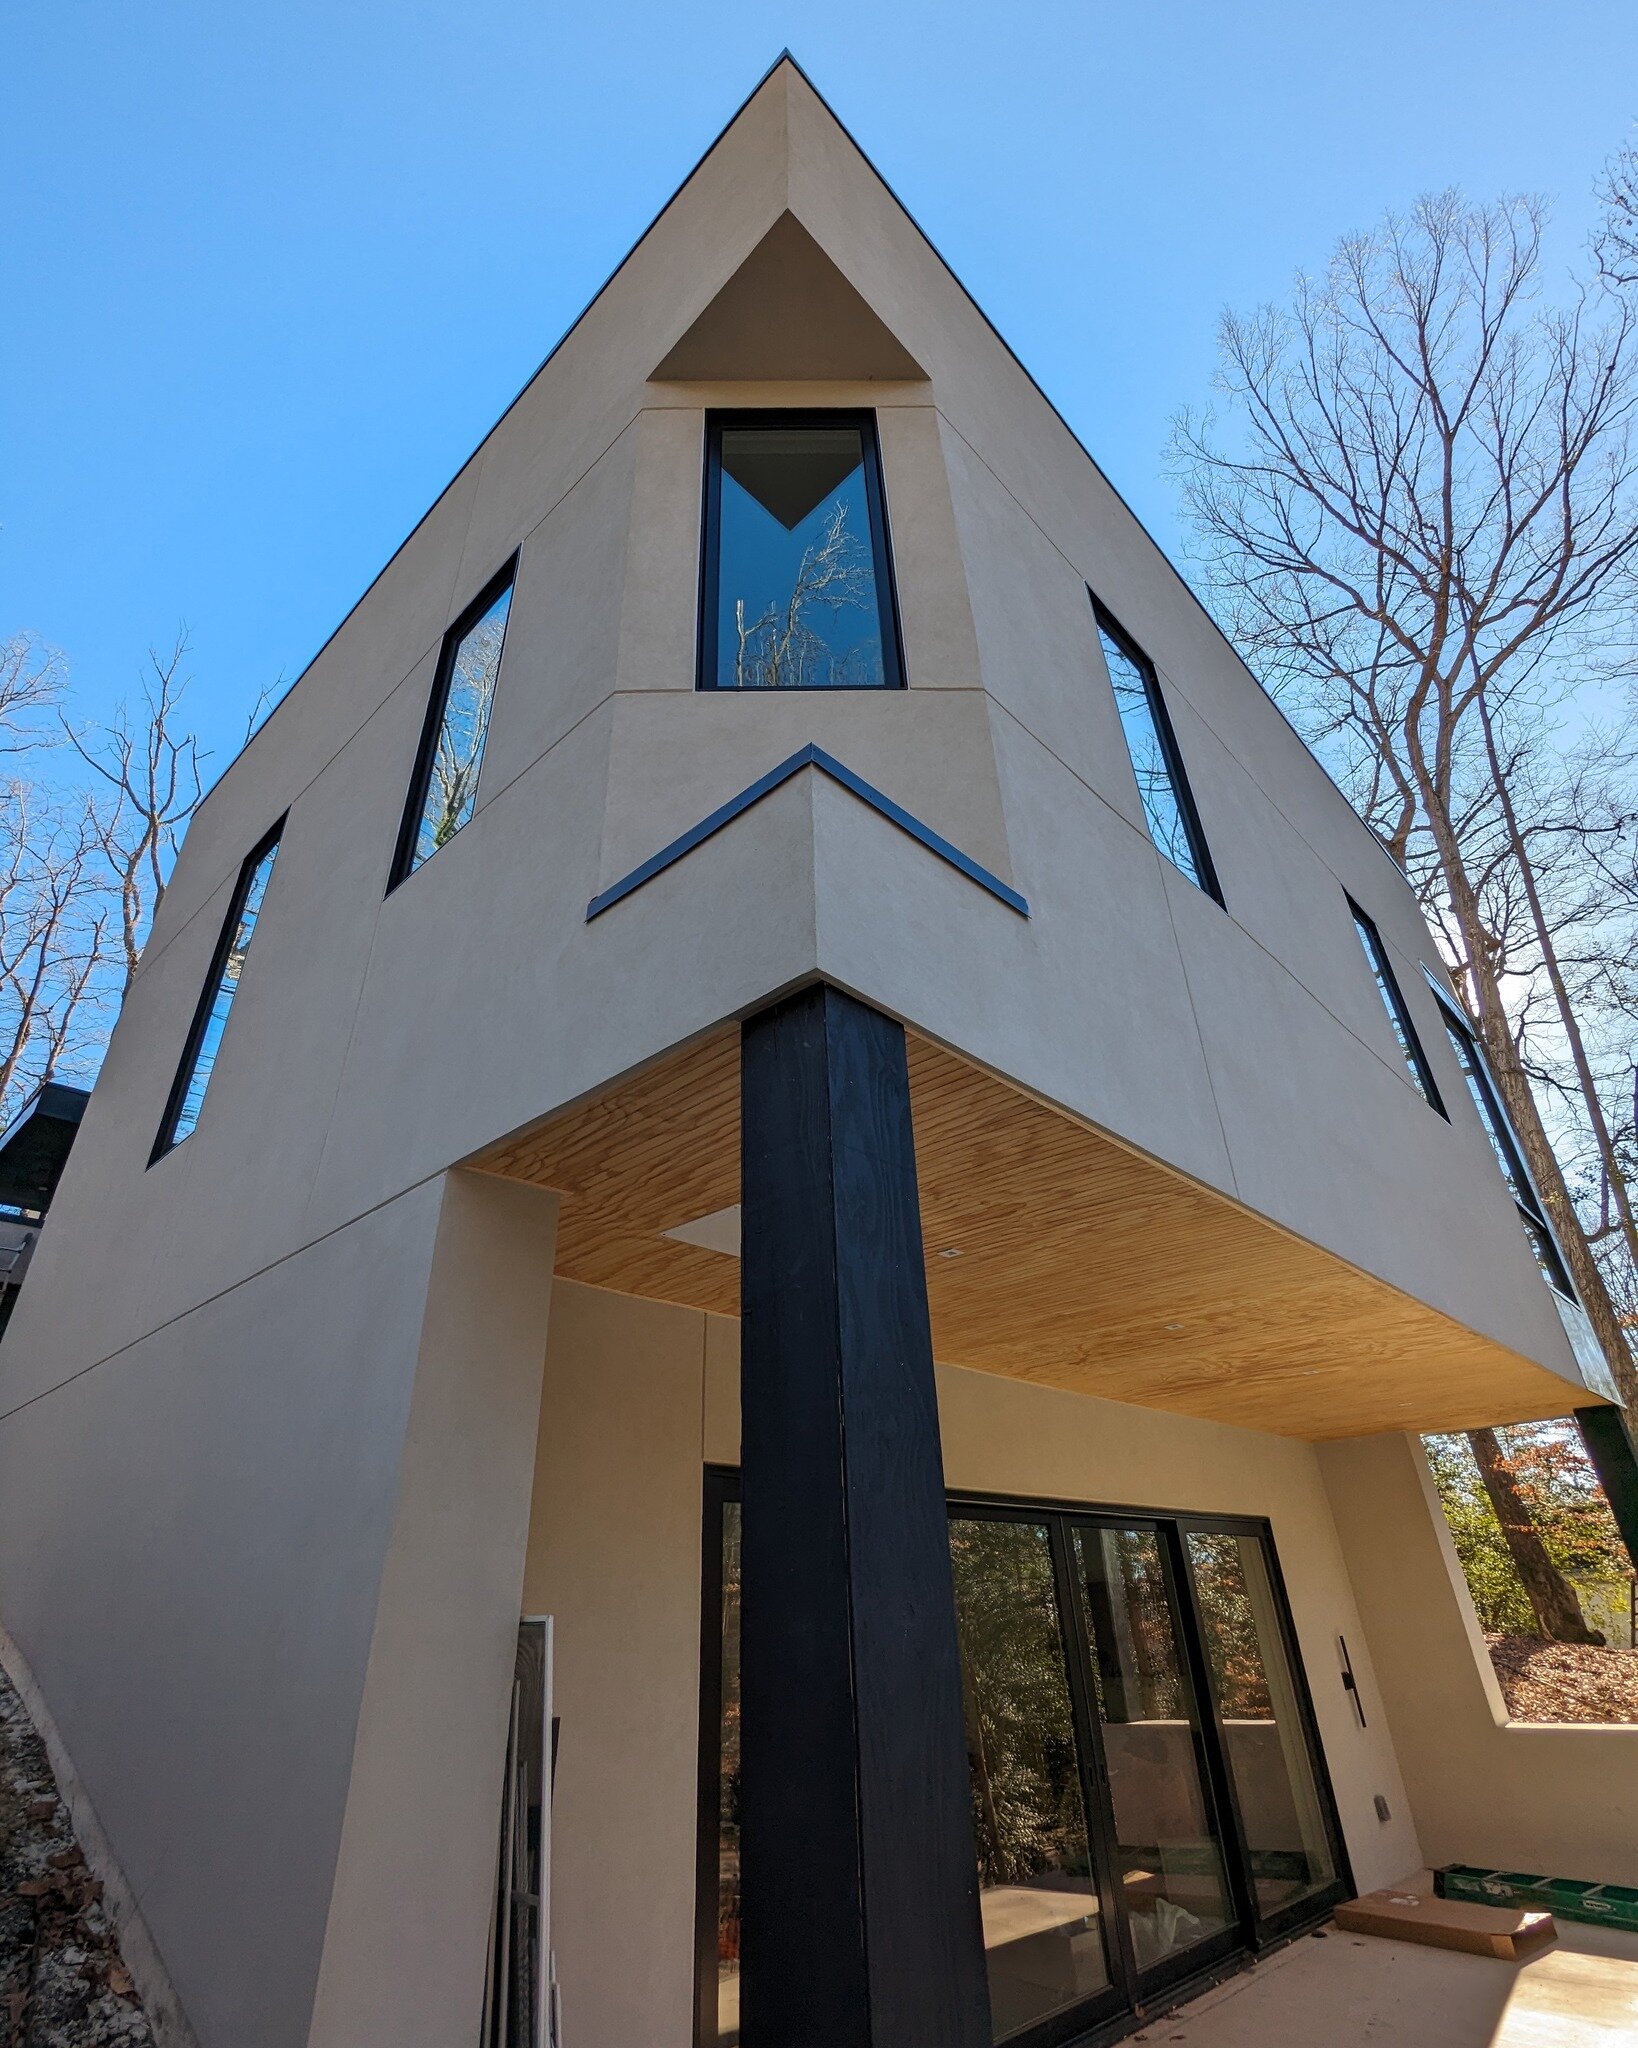 The final touches are coming together at the Hillside House! Nestled in the landscape, the elevated living area offers views into the surrounding tree canopy. The interior features natural wood finishes, which create a connection to its surrounding e